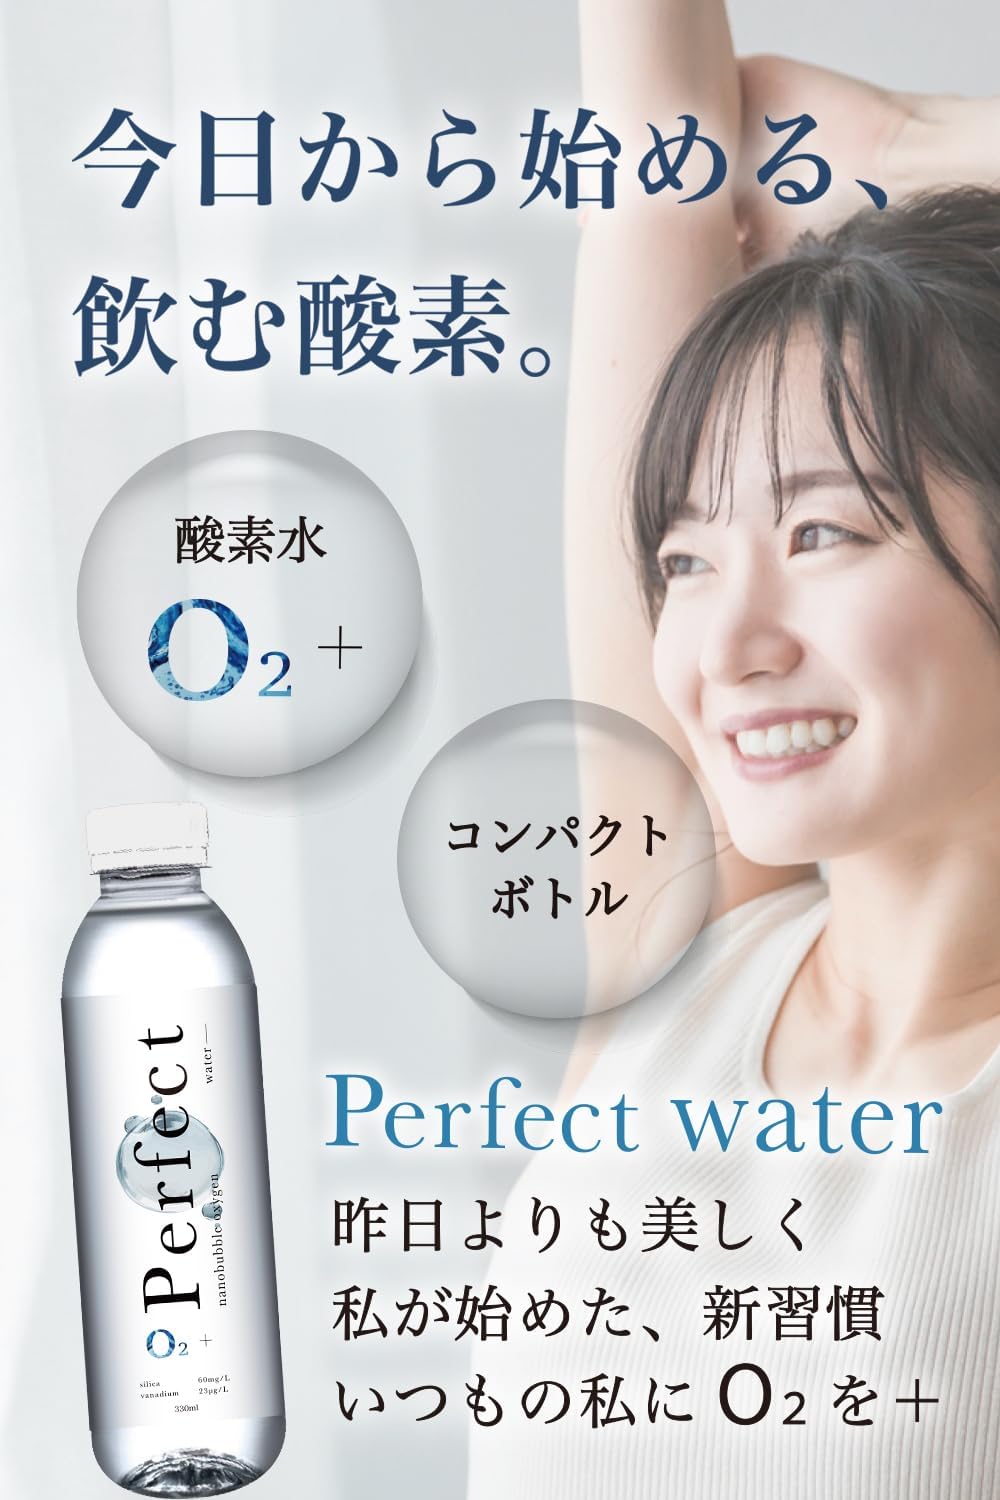 perfect water（パーフェクトウォーター）